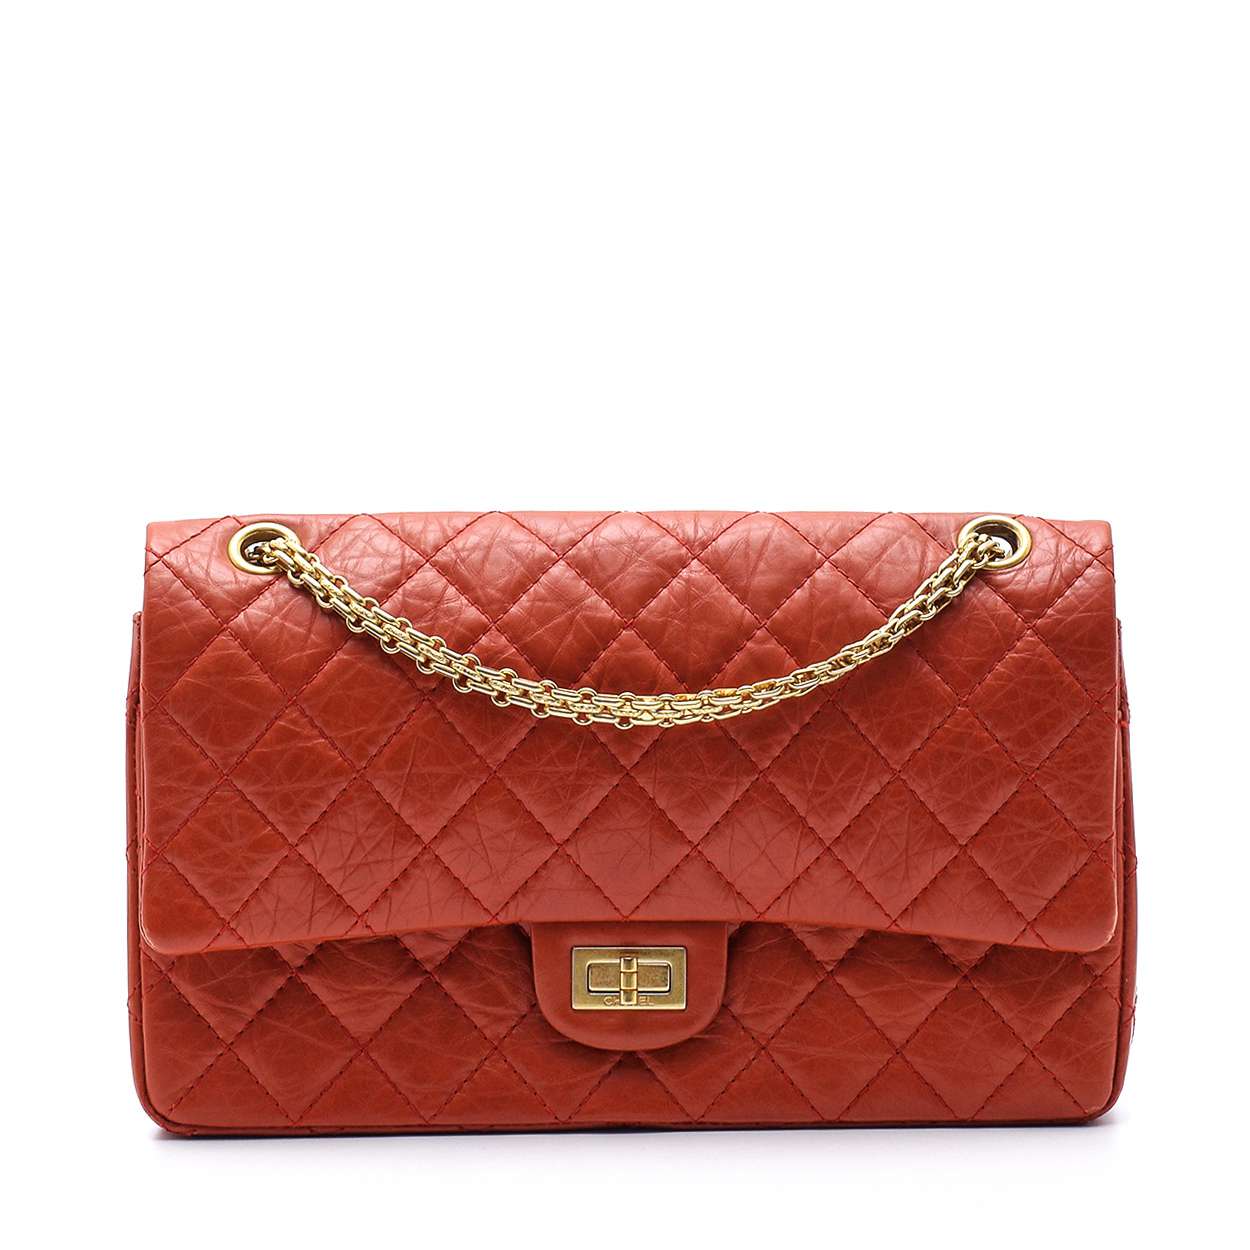 Chanel - Red 2.55 Reissue Quilted Lambskin Leather Flap Bag